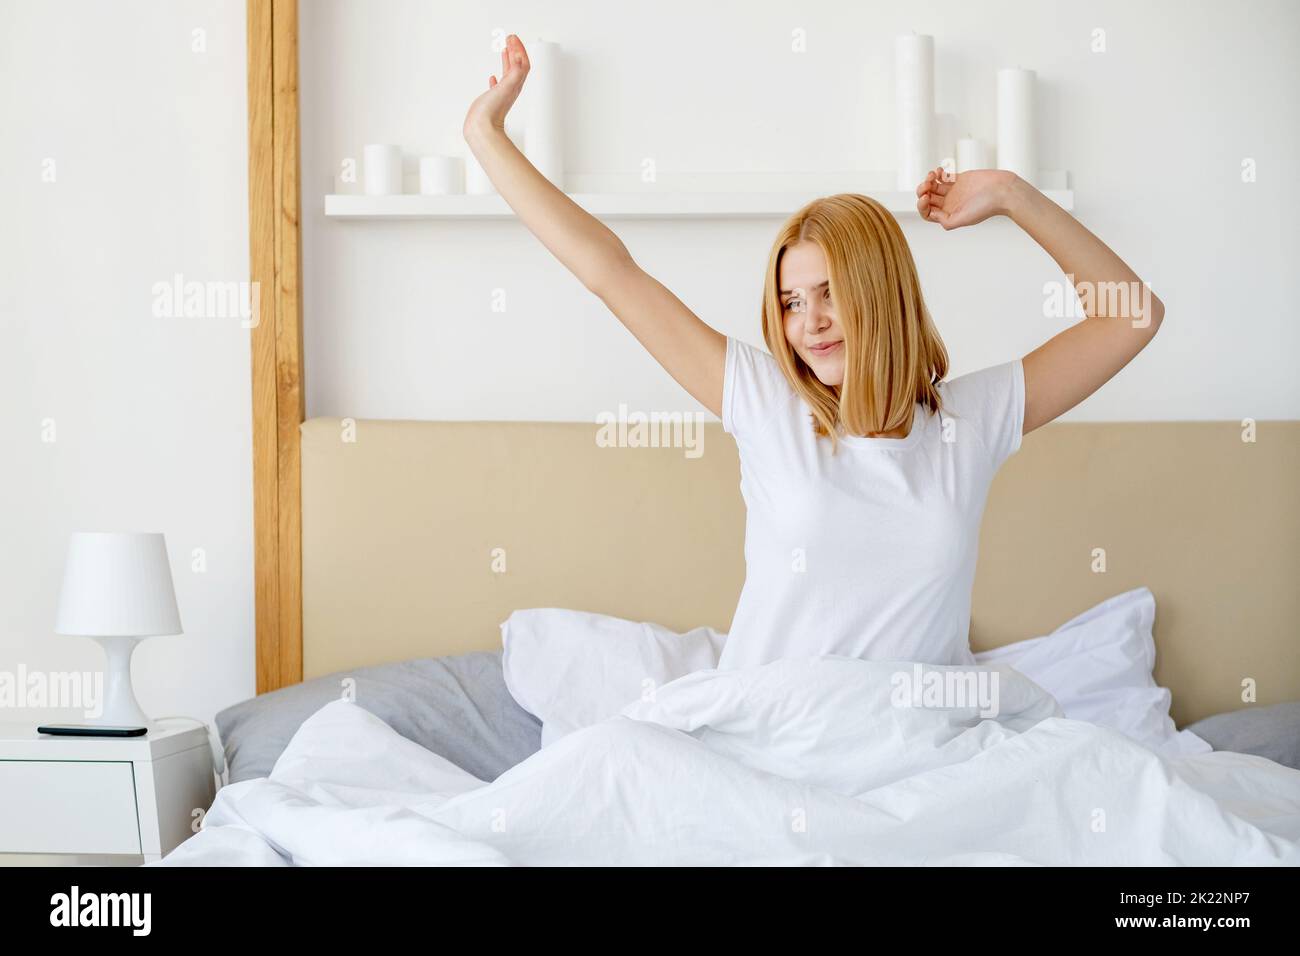 Good morning. Rise and shine. Healthy wellbeing. Sleep wellness. Fresh rested cheerful young woman stretching in soft bed white bedsheets blanket at c Stock Photo